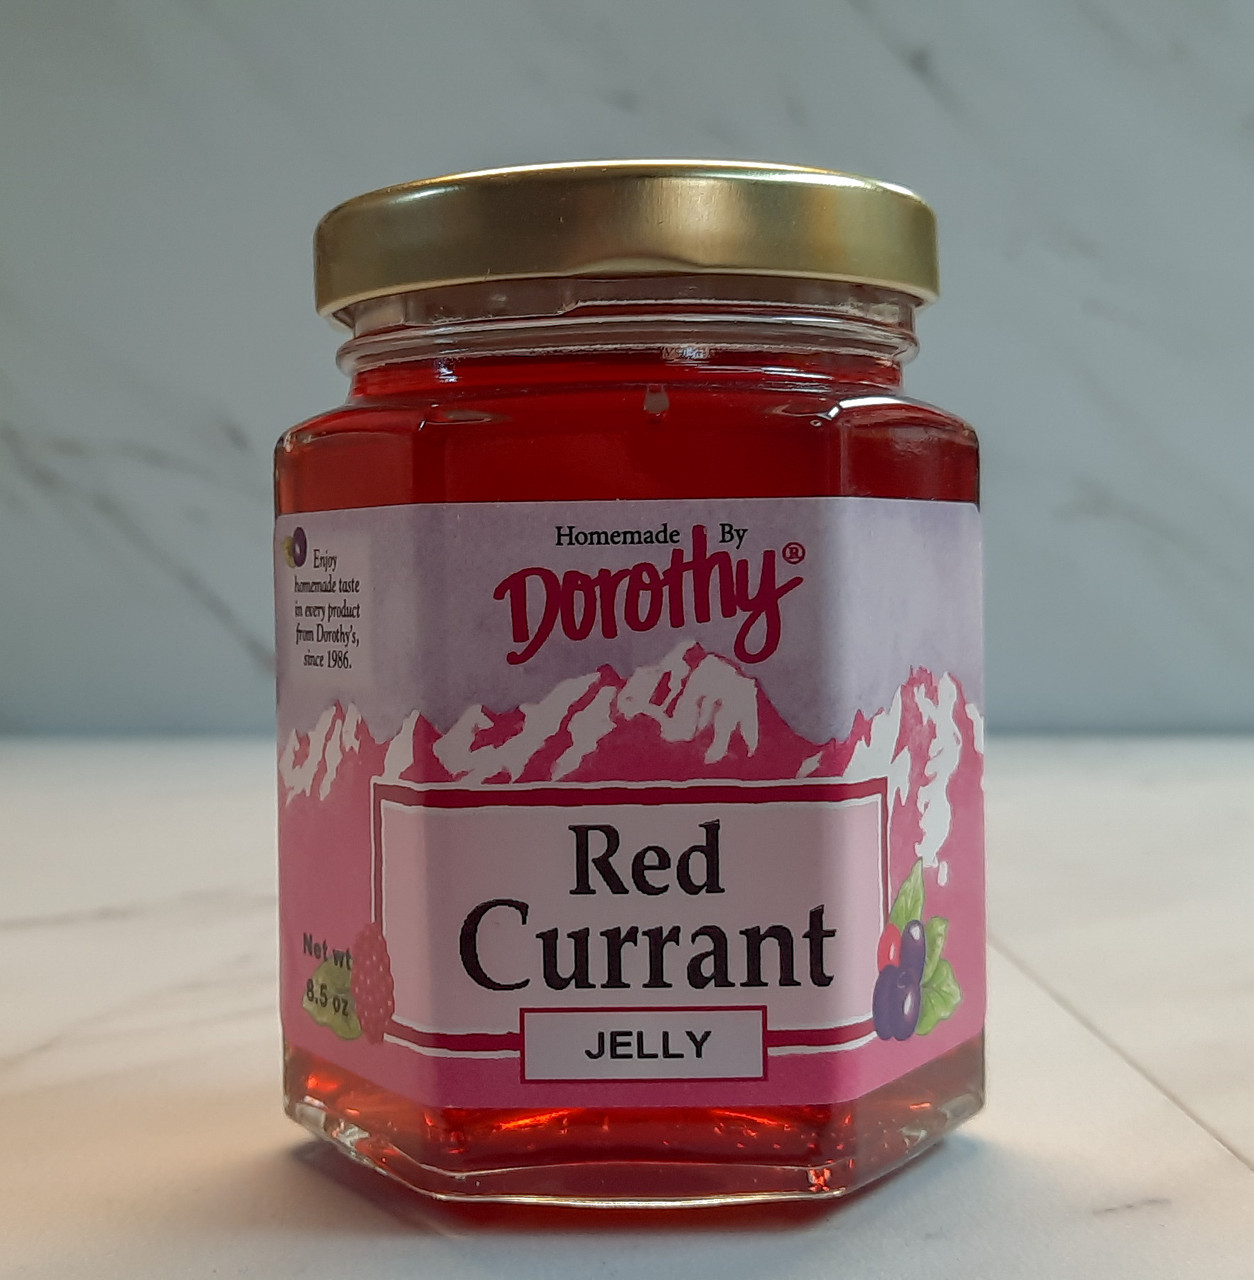 Red Currant Jelly - Homemade by Dorothy